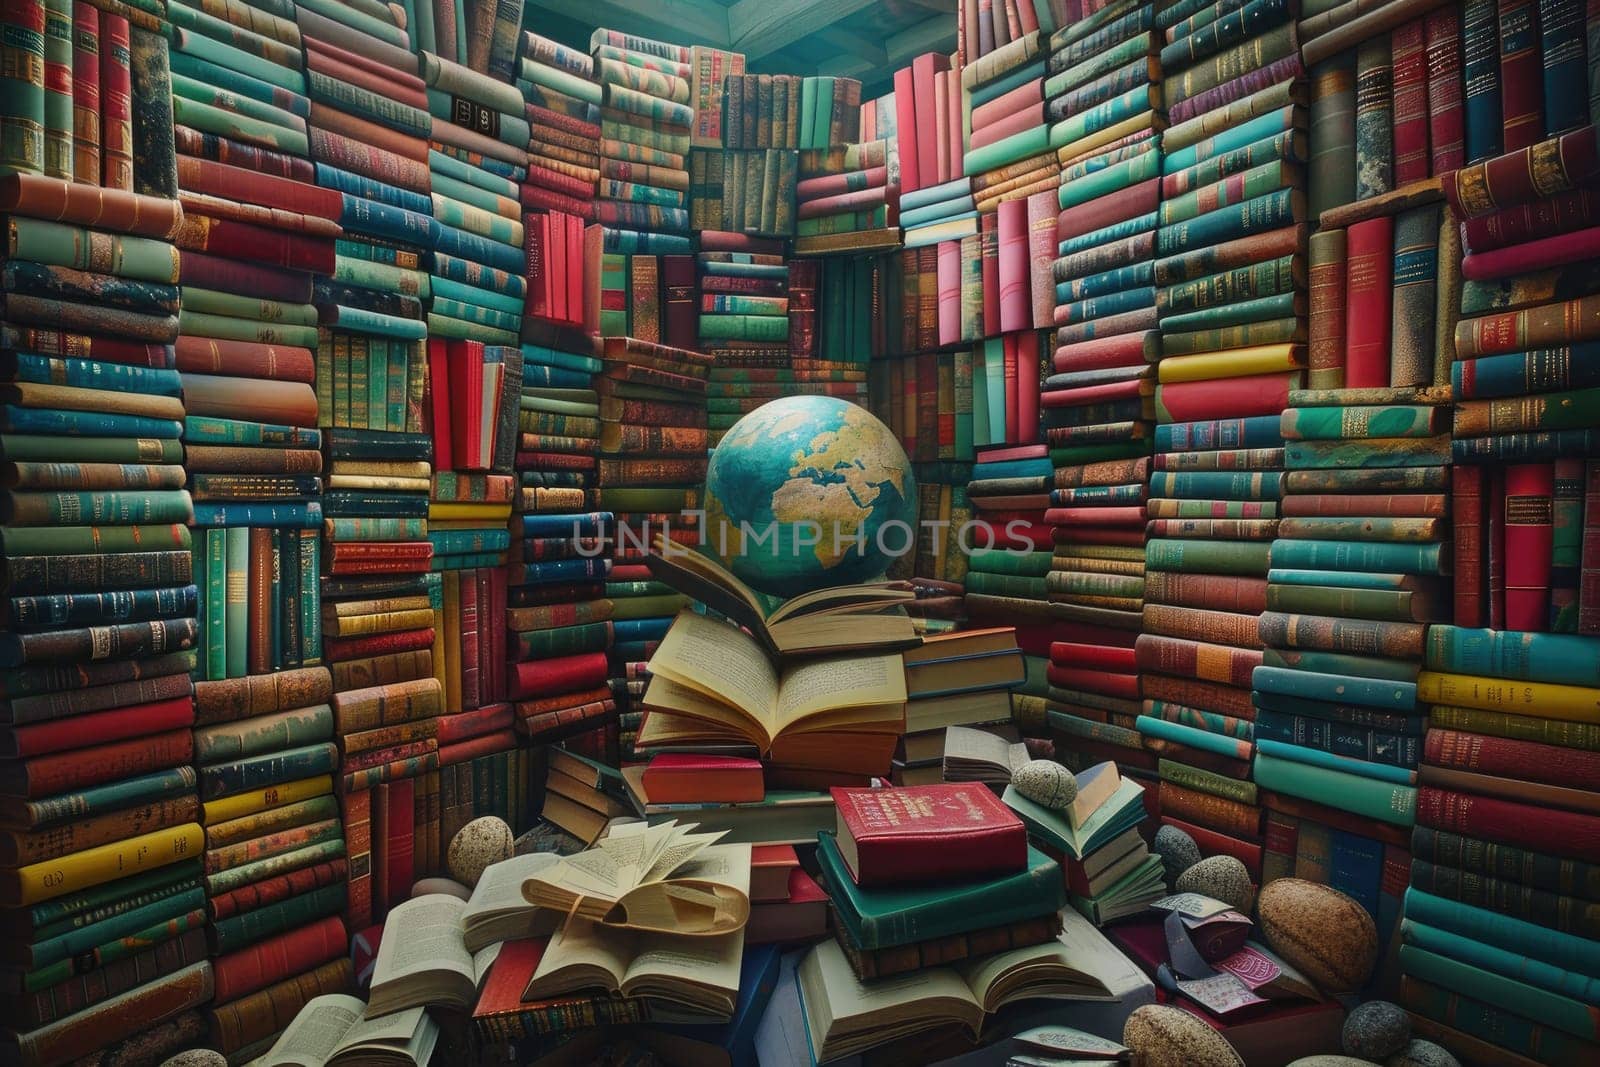 On World Book Day, envision a scene where books from around the globe gather, symbolizing the universal language. by Chawagen